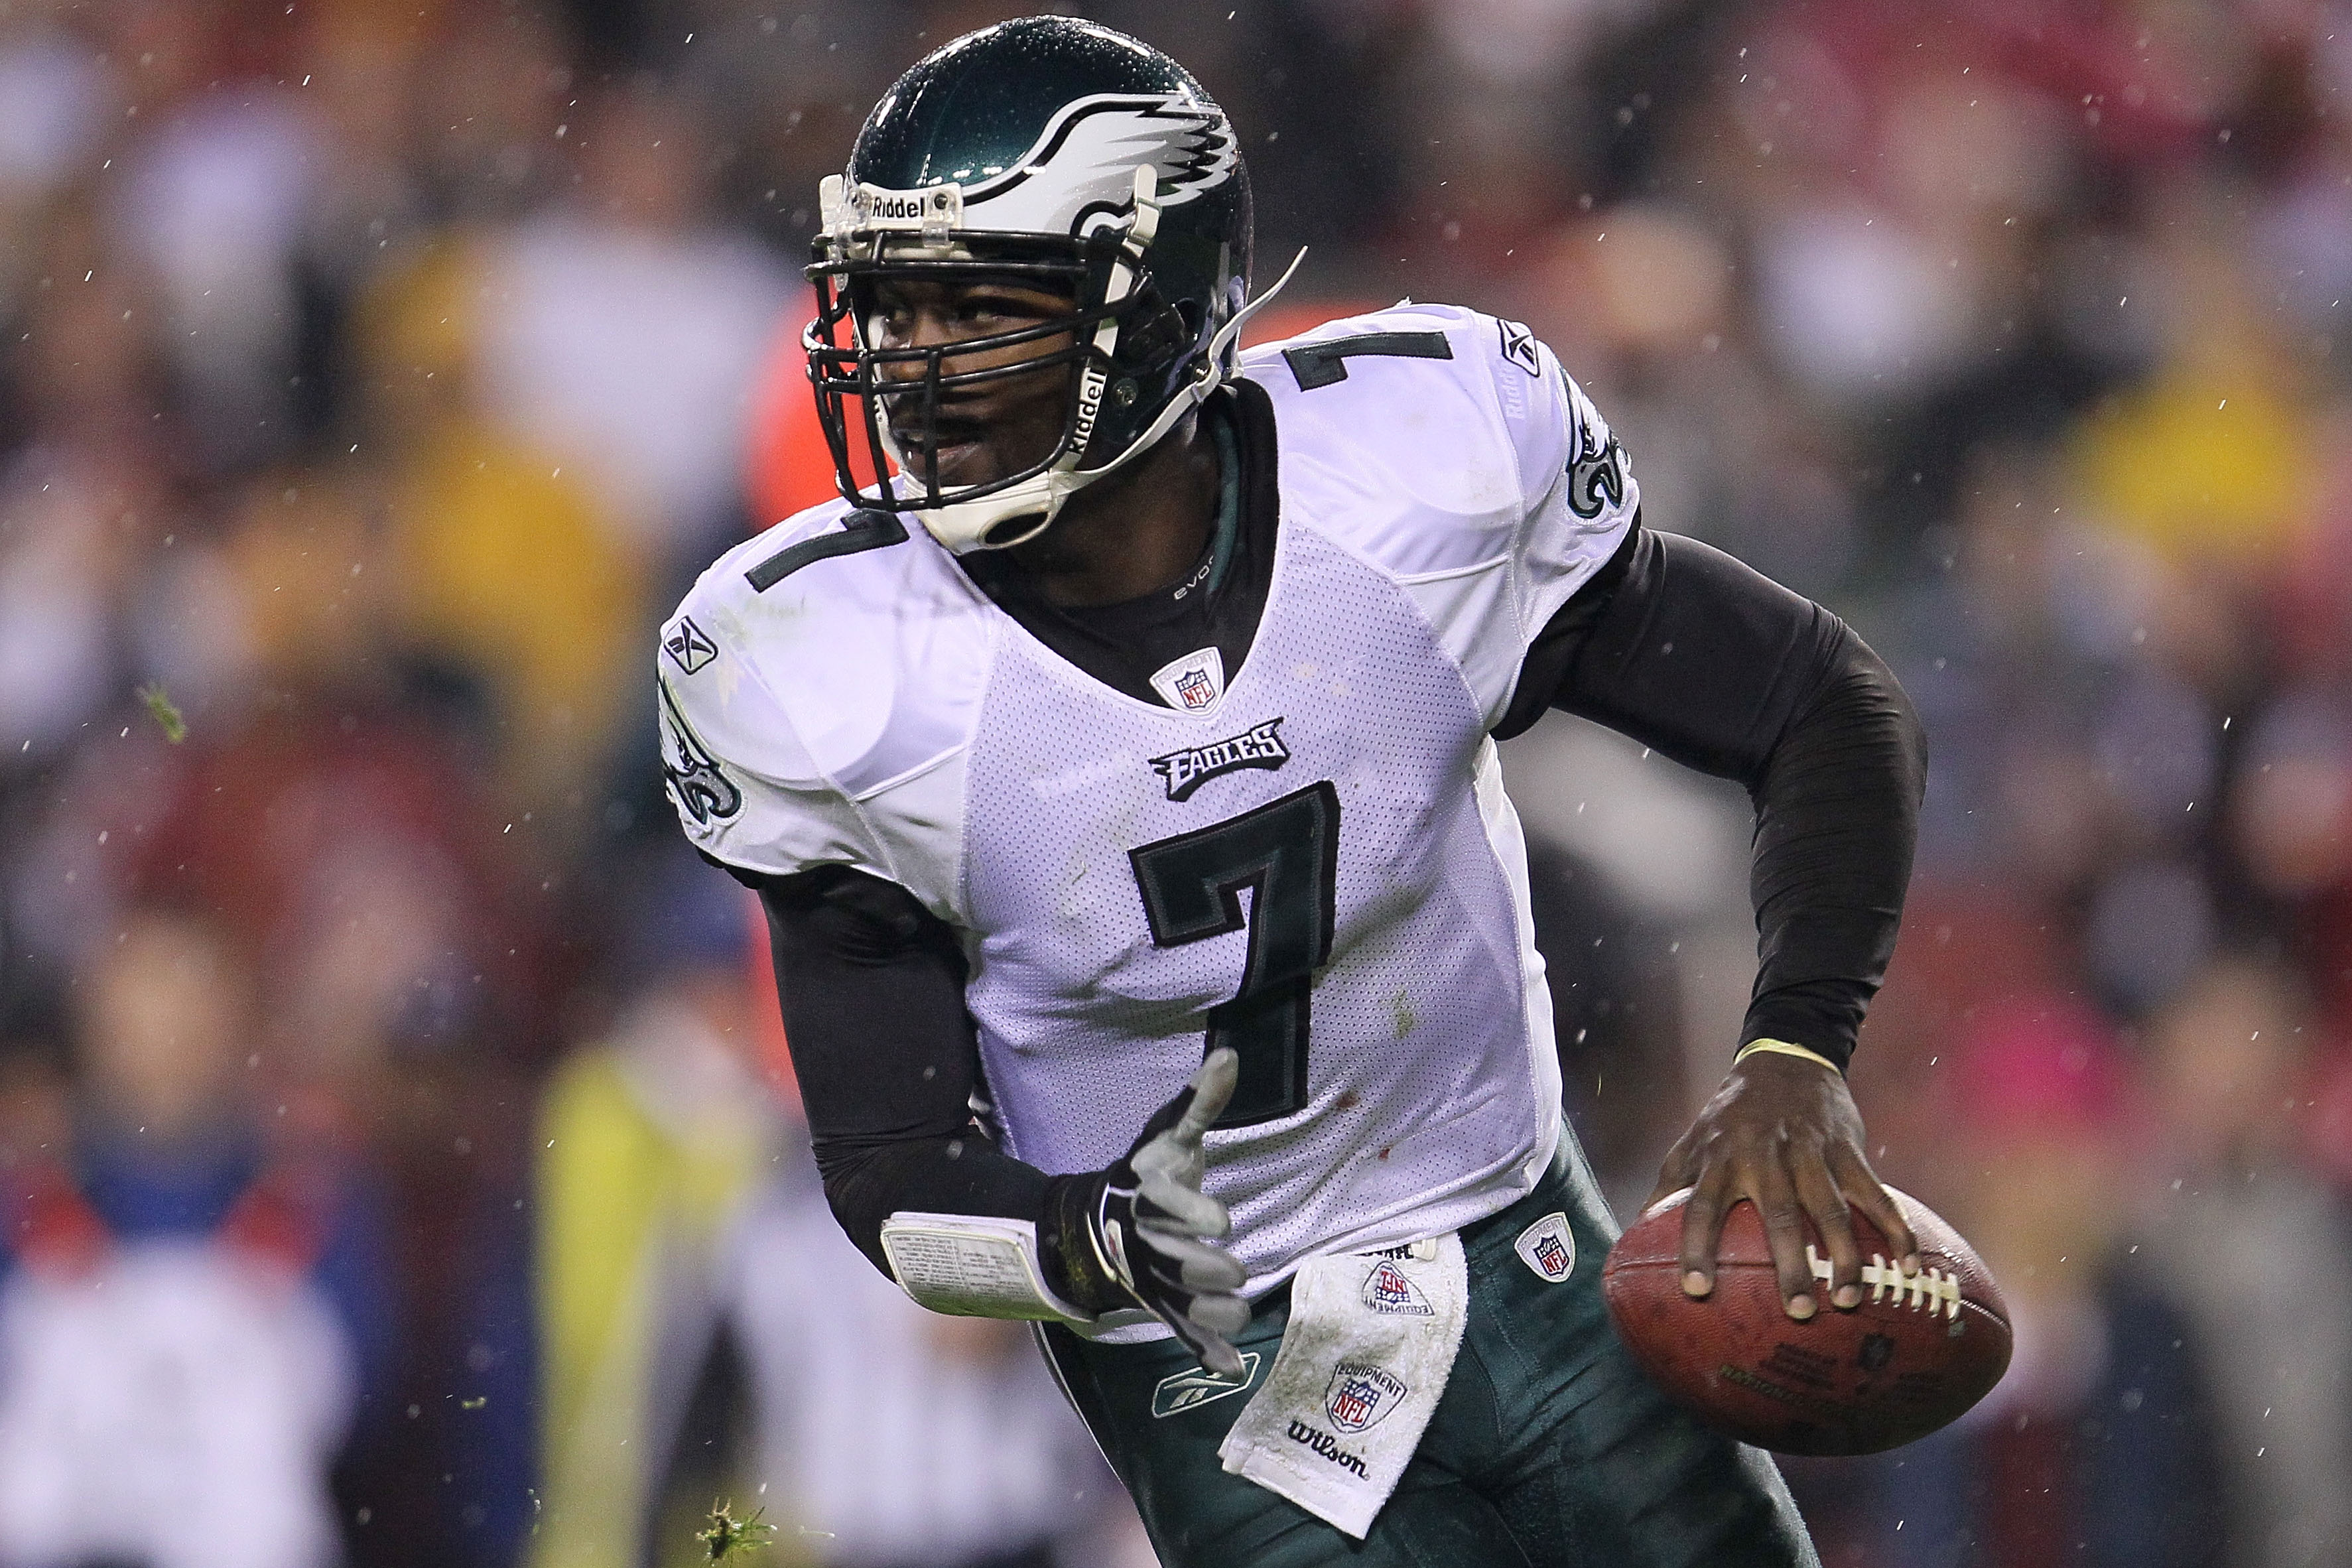 LANDOVER, MD - NOVEMBER 15:  Michael Vick #7 of the Philadelphia Eagles looks to pass against the Washington Redskins on November 15, 2010 at FedExField in Landover, Maryland.  (Photo by Chris McGrath/Getty Images)